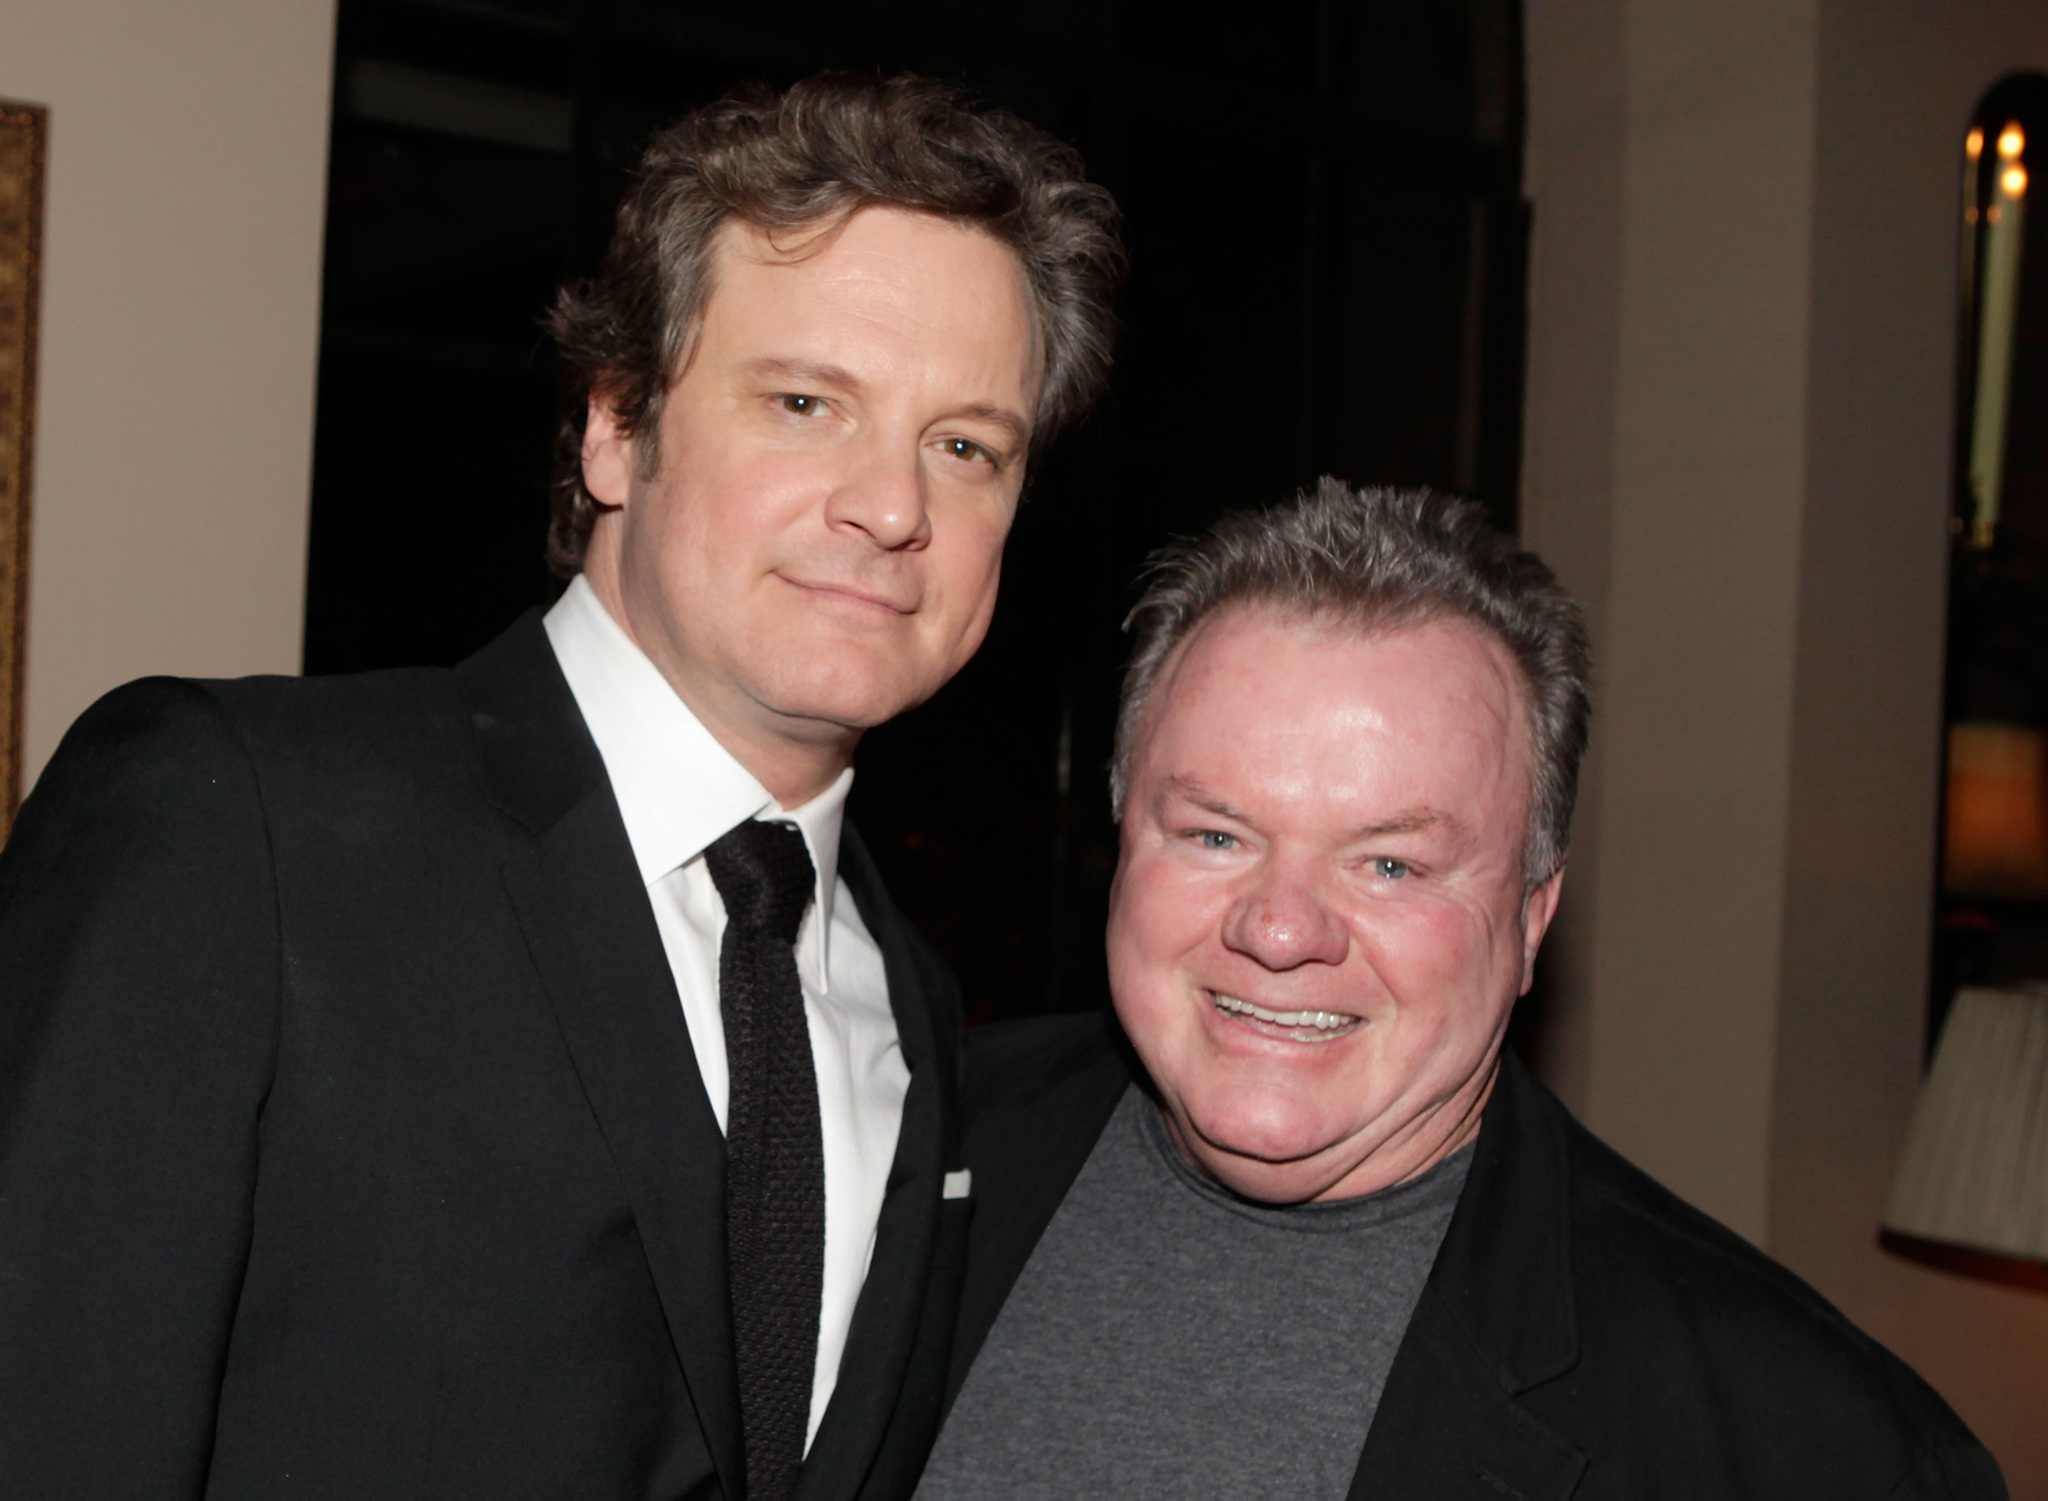 Colin Firth and Jack McGee